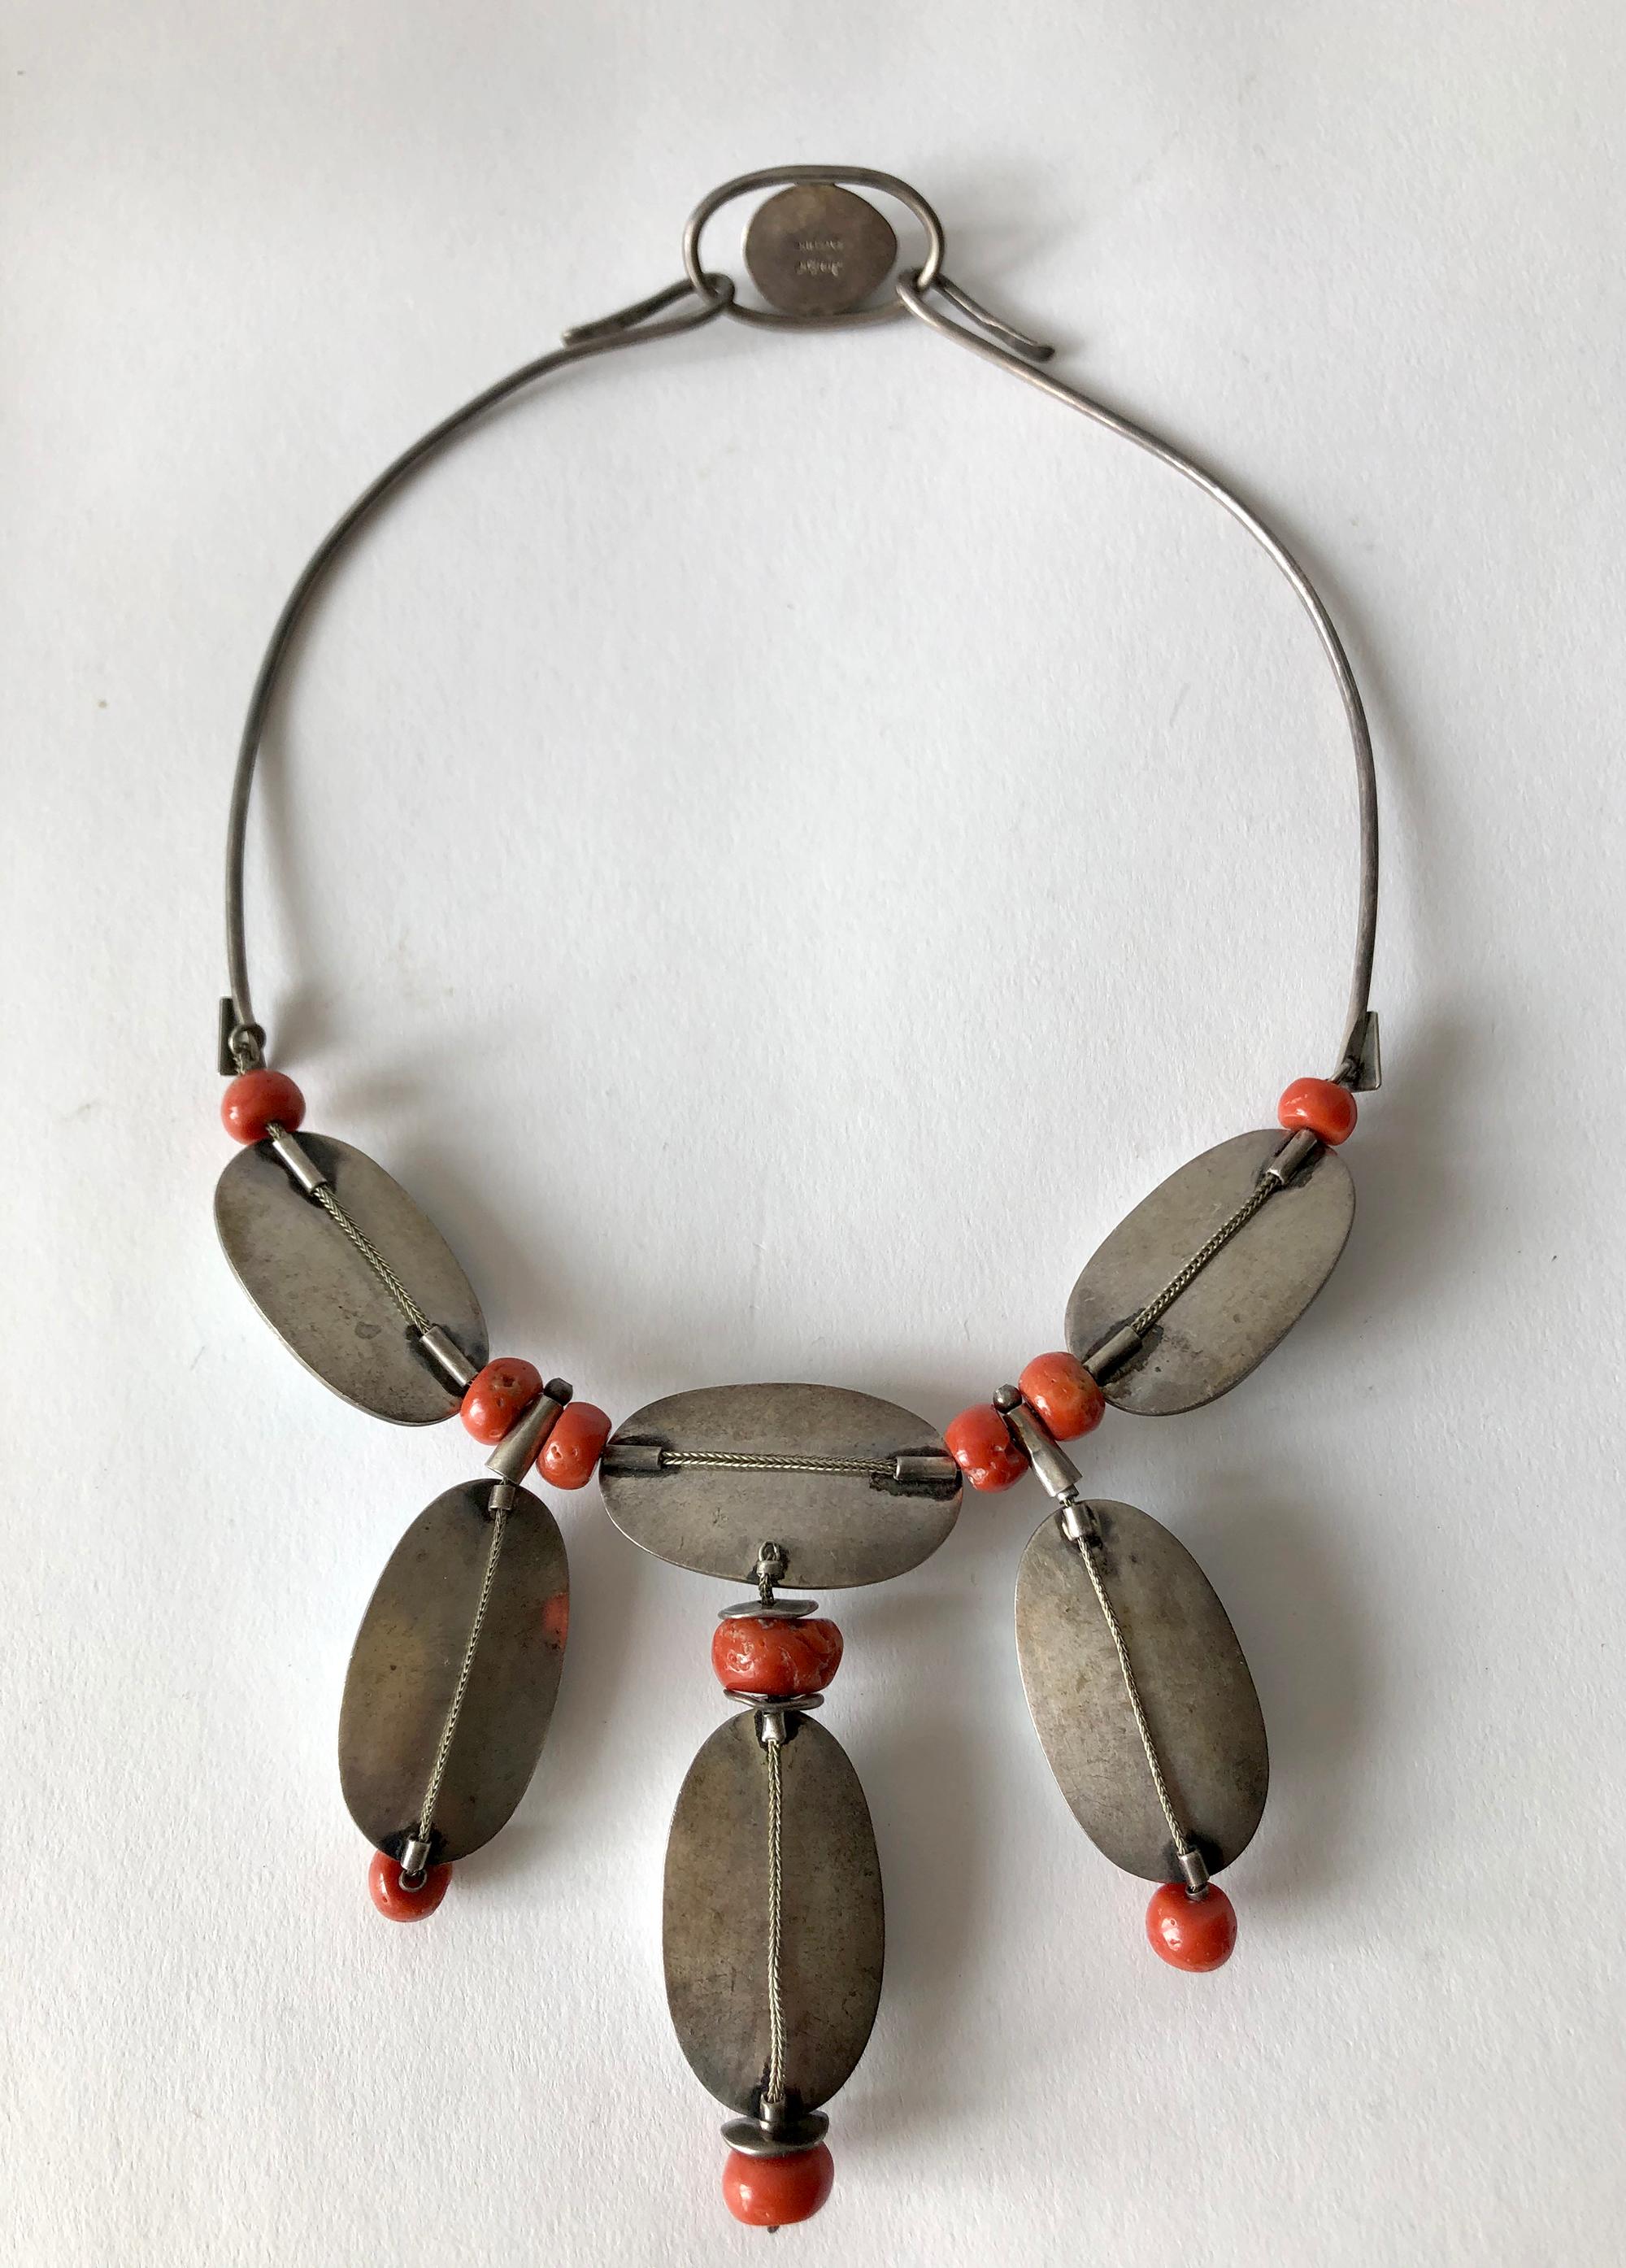 Mother of pearl and coral beaded necklace created by Miye Matsukata for Atelier Janiyé of Boston, Massachusetts. Necklace measures 17.5